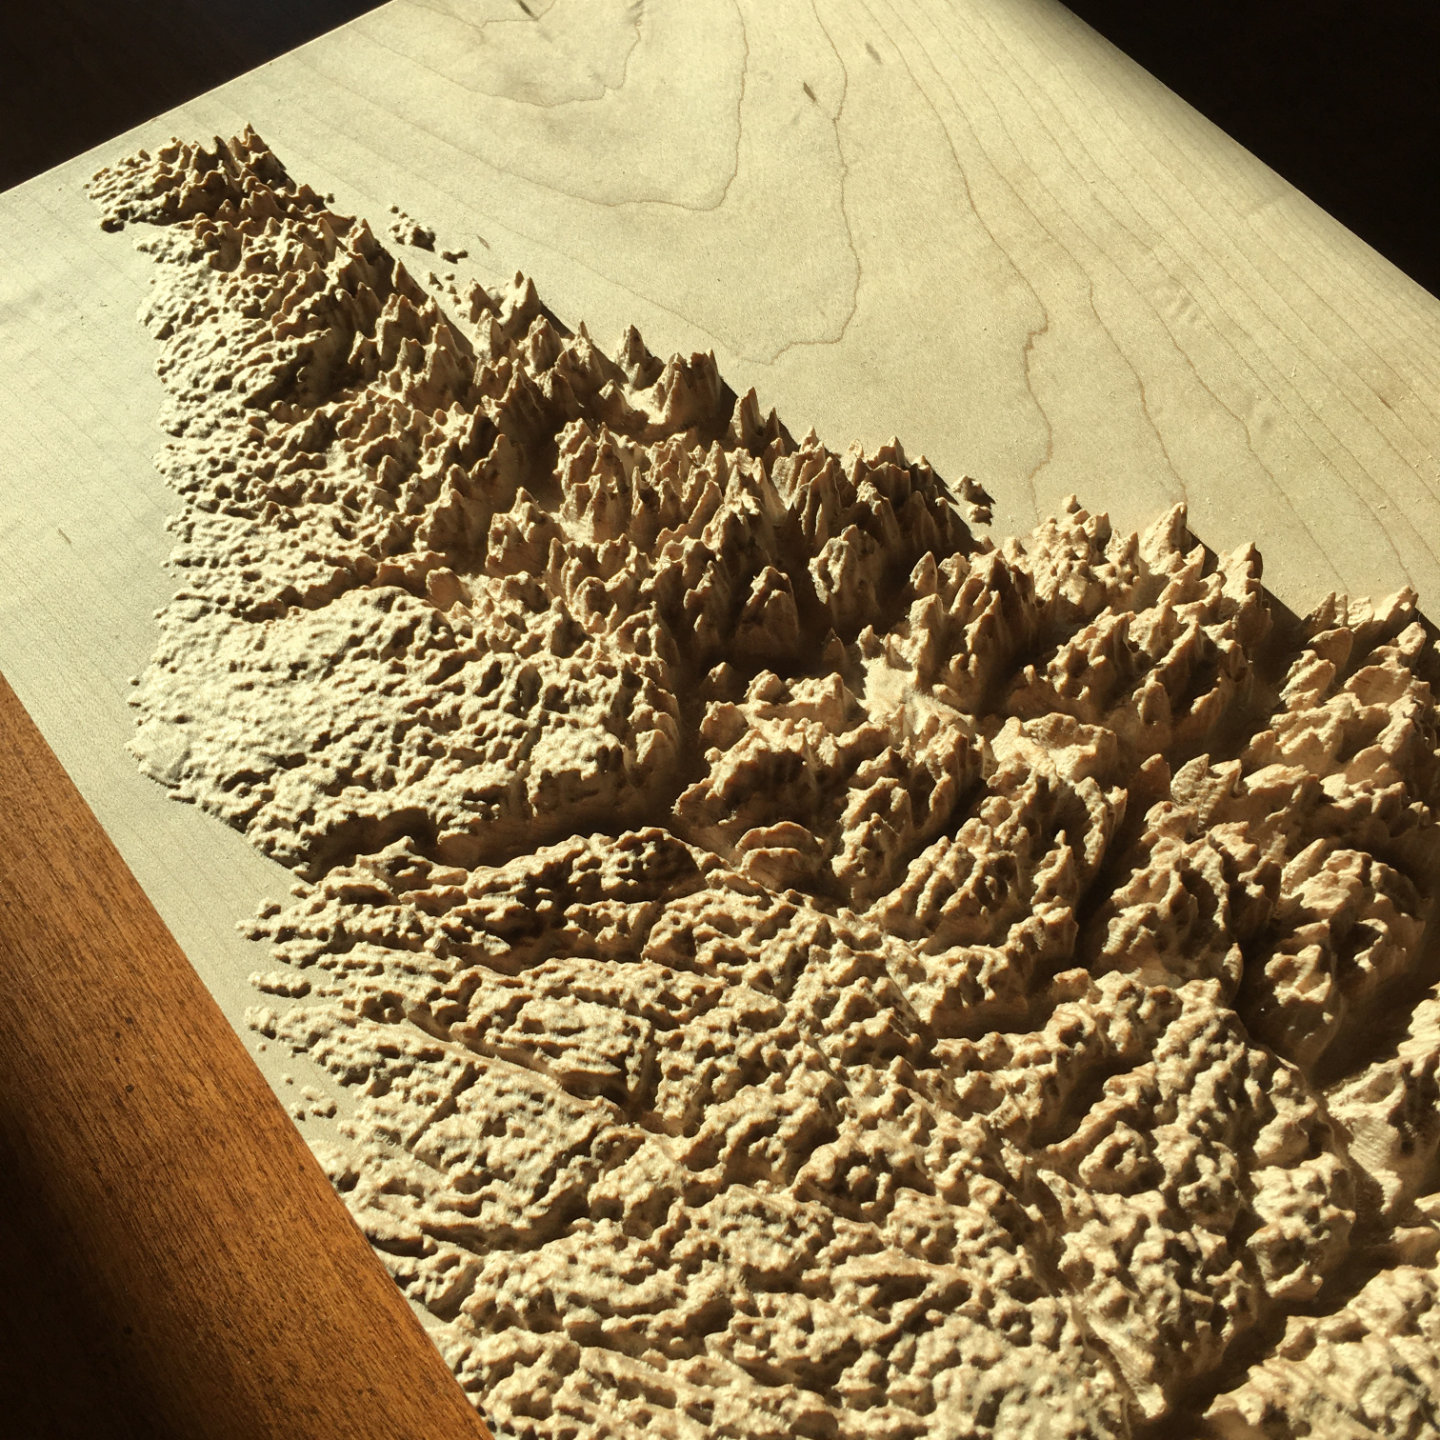 three-dimensional wood-carved relief map of the Torngat Mountains, Labrador, Canada